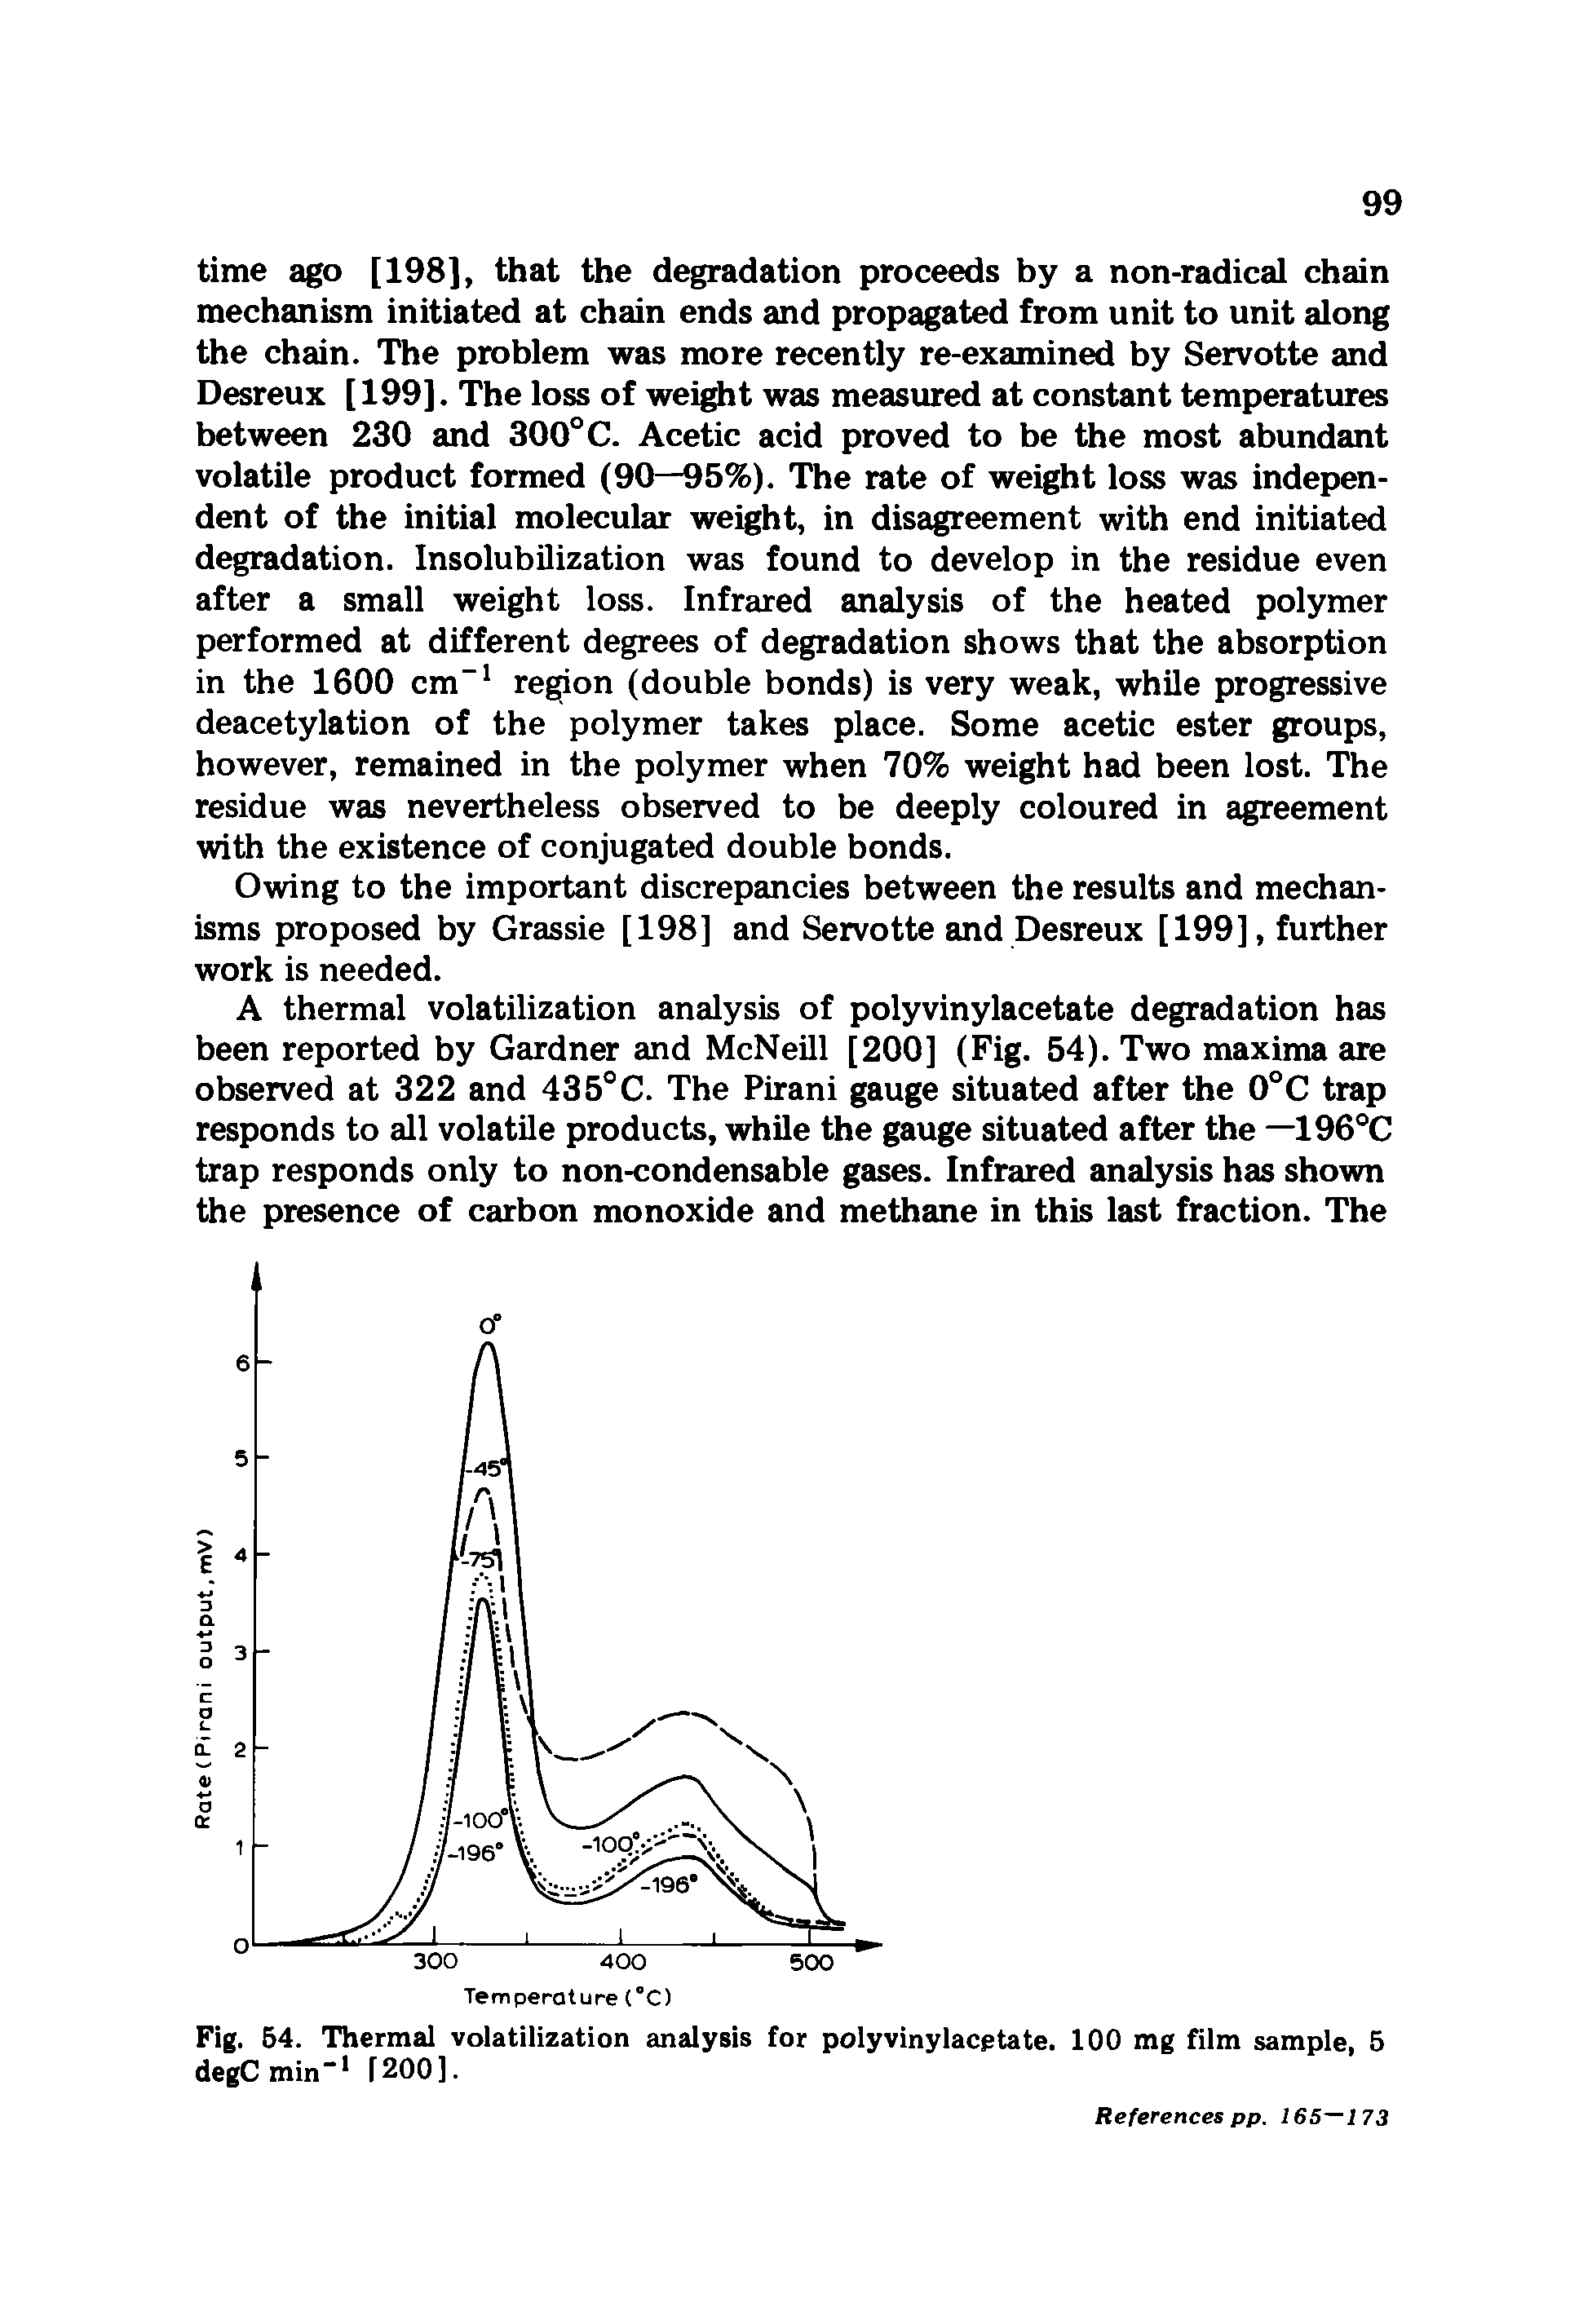 Fig. 54. Thermal volatilization analysis for polyvinylacptate. 100 mg film sample, 5 degCmin-1 1200].